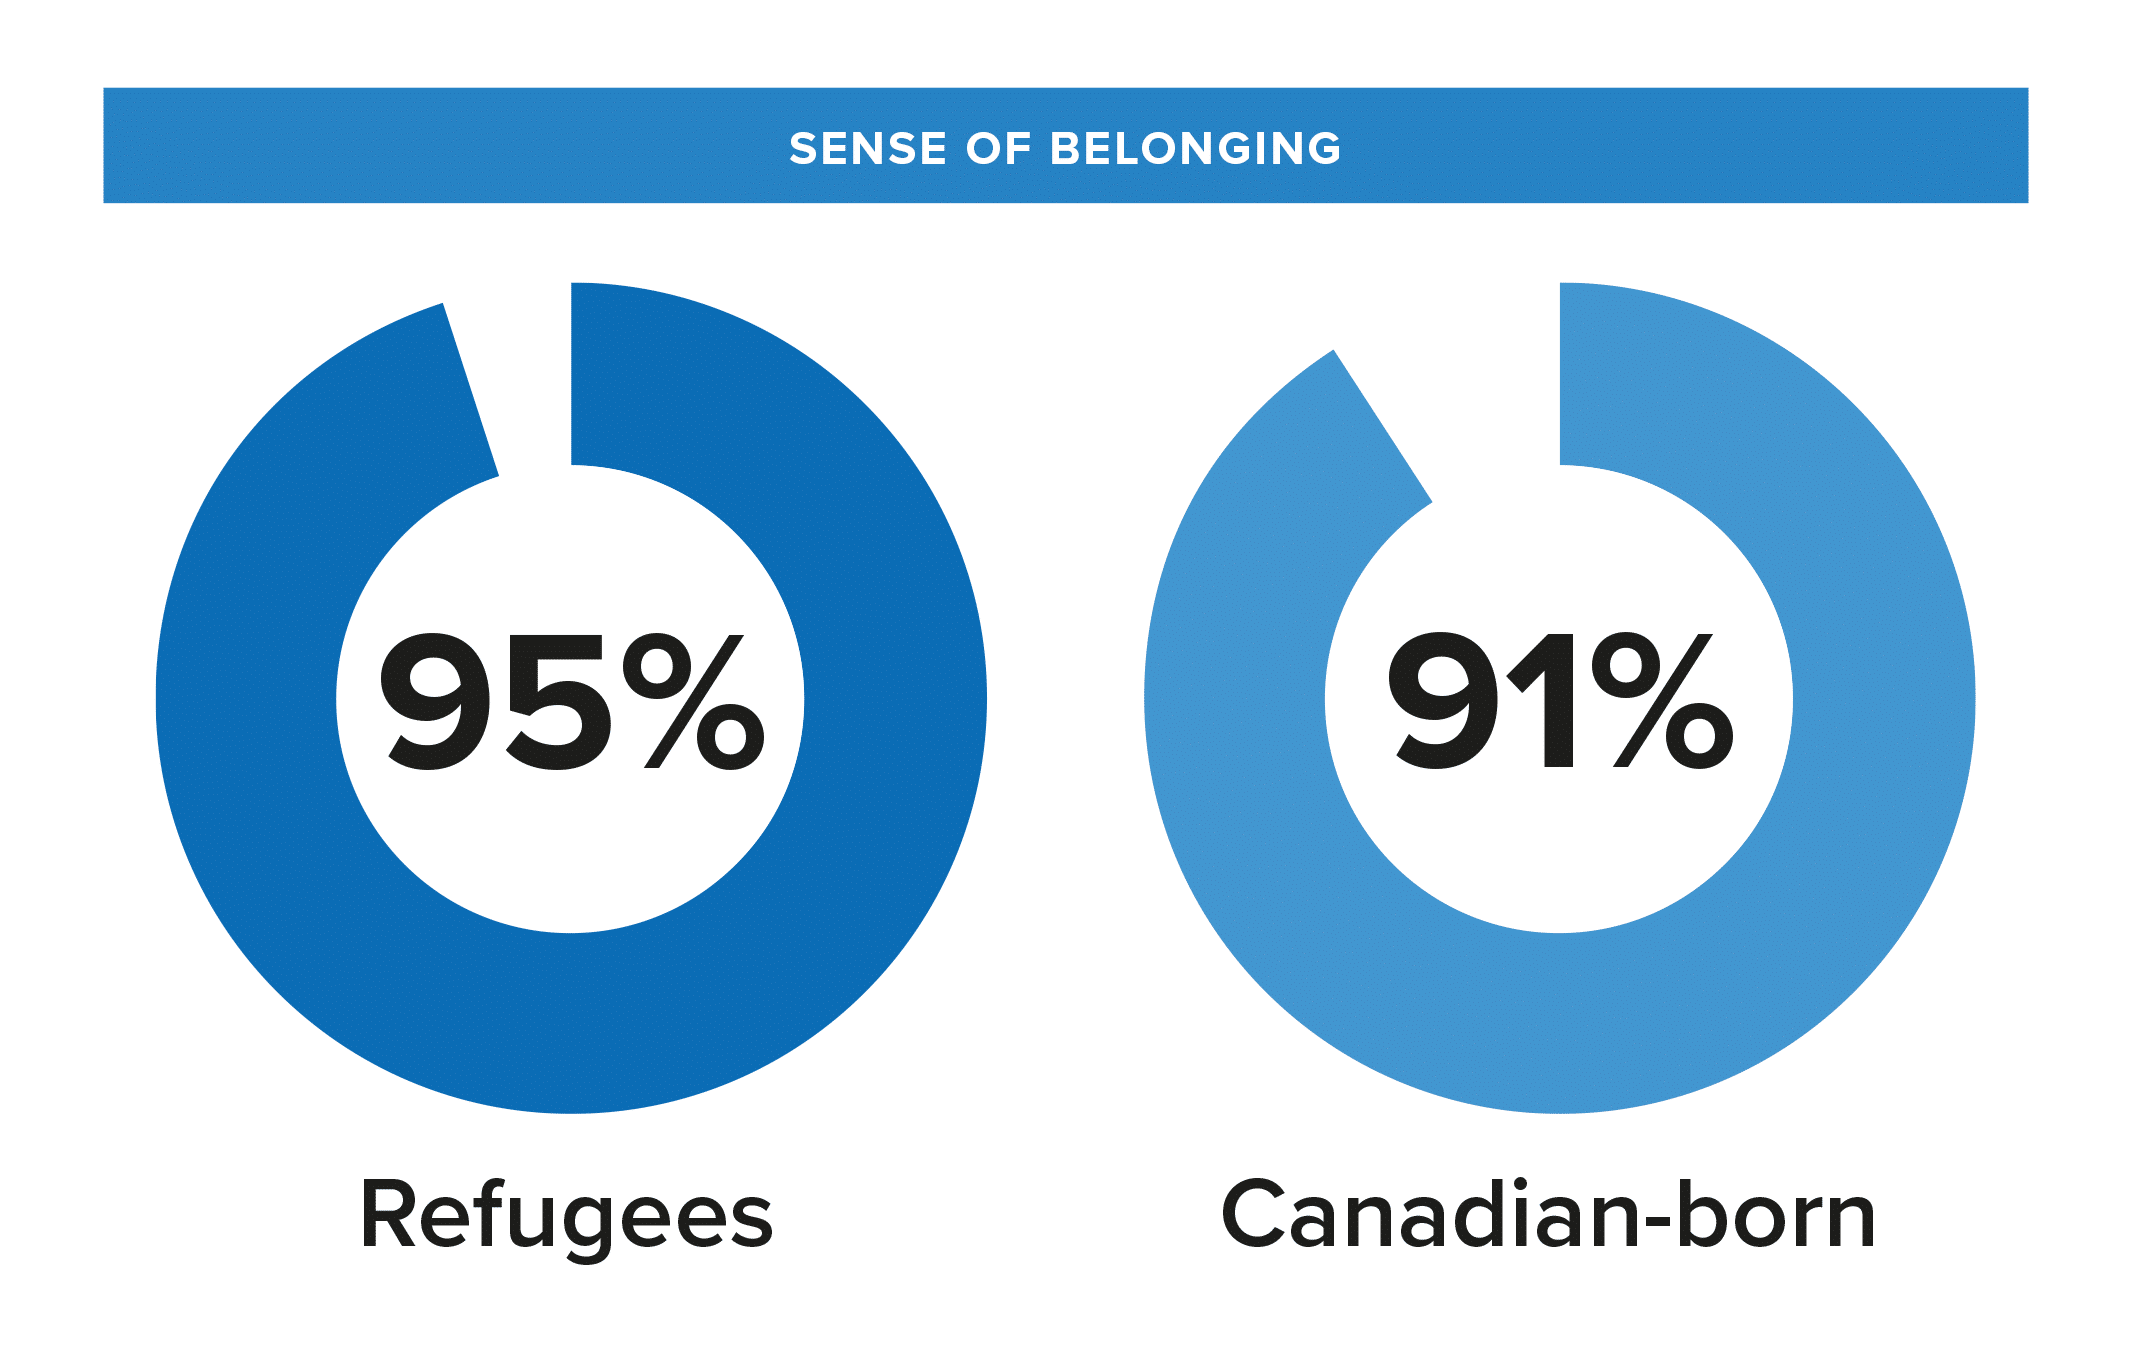 Graph showing sense of belonging rates for refugees and Canadian-born citizens.